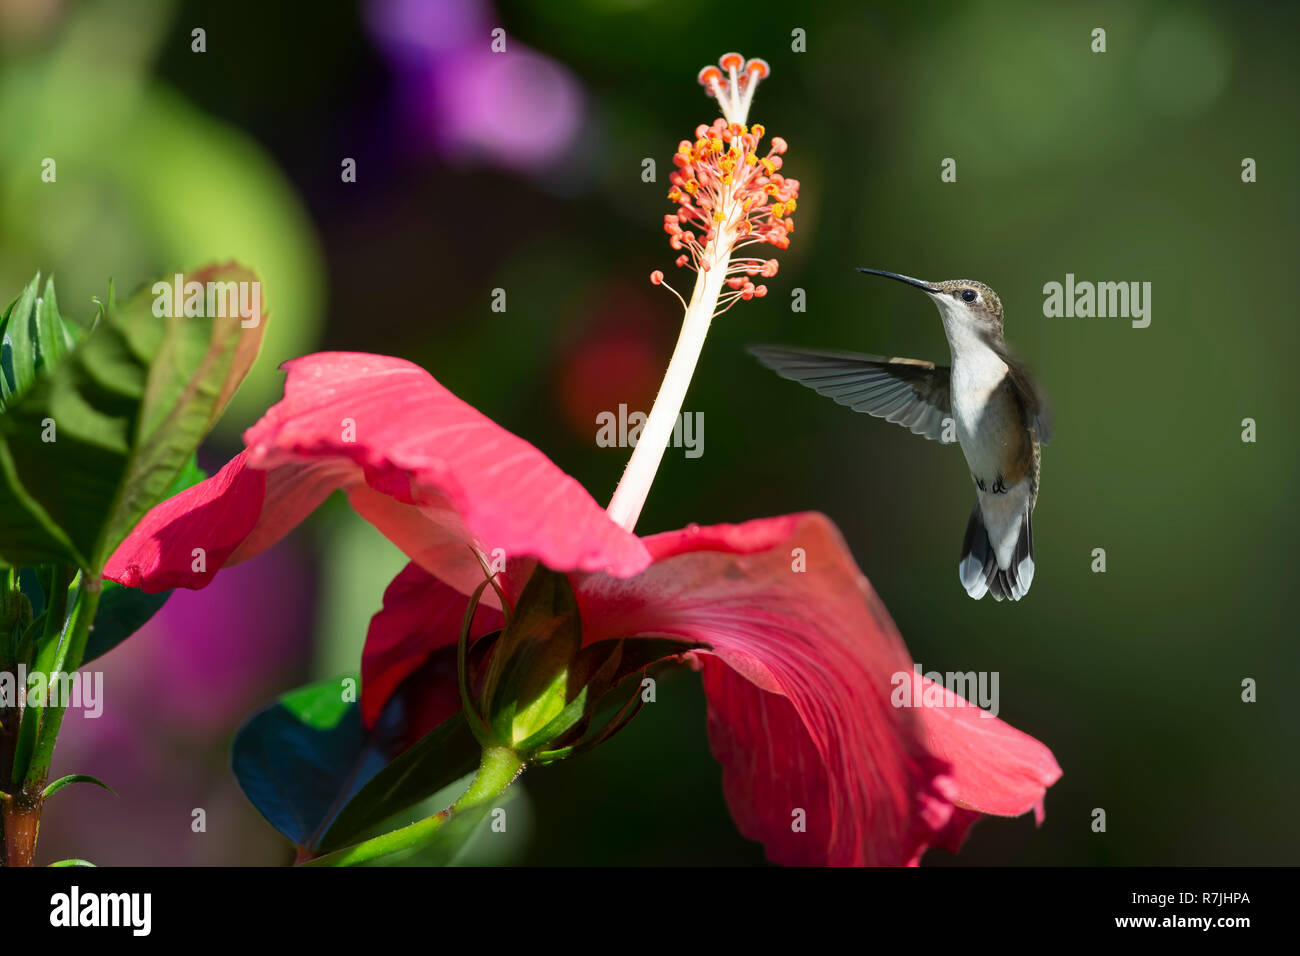 Ruby-throated Hummingbird flying near a Hibiscus flower. Stock Photo